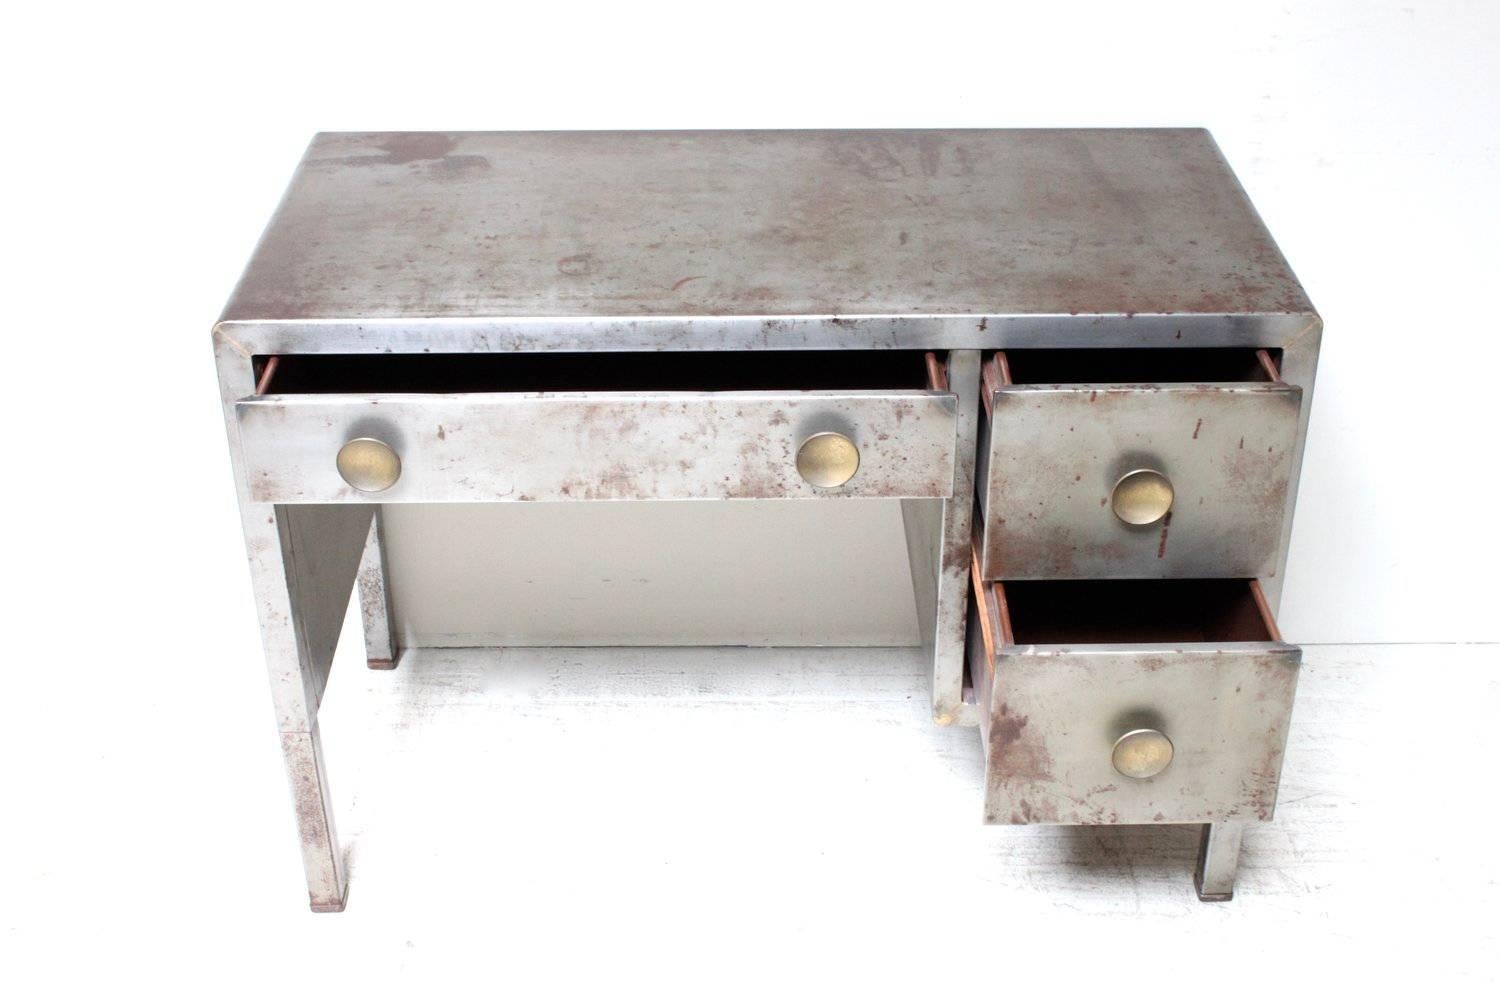 A perfectly patina example of the famous desk designed by Norman Bel Geddes for Simmons in the 1930s.